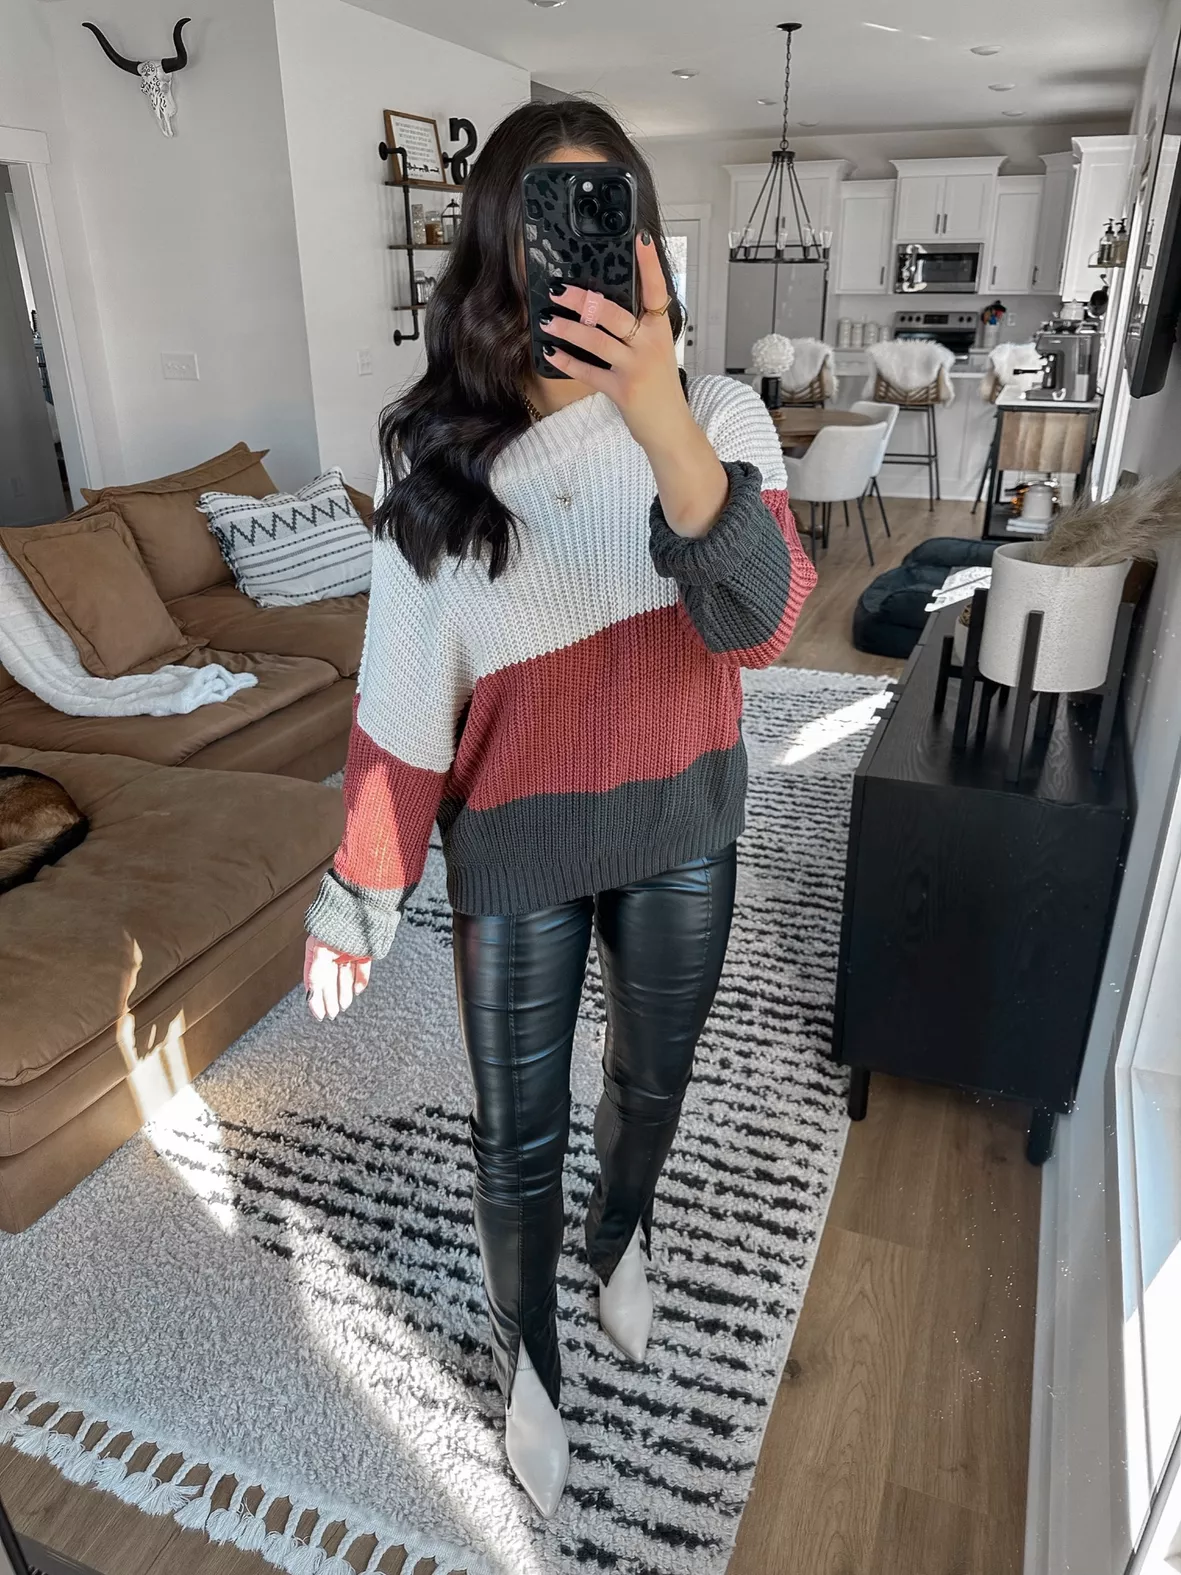 You can pry the oversized sweater and leggings from my cozy, warm fingers  🧶🧶🧶 Day 2/30 Plus Size Outfits for Fall! It's still